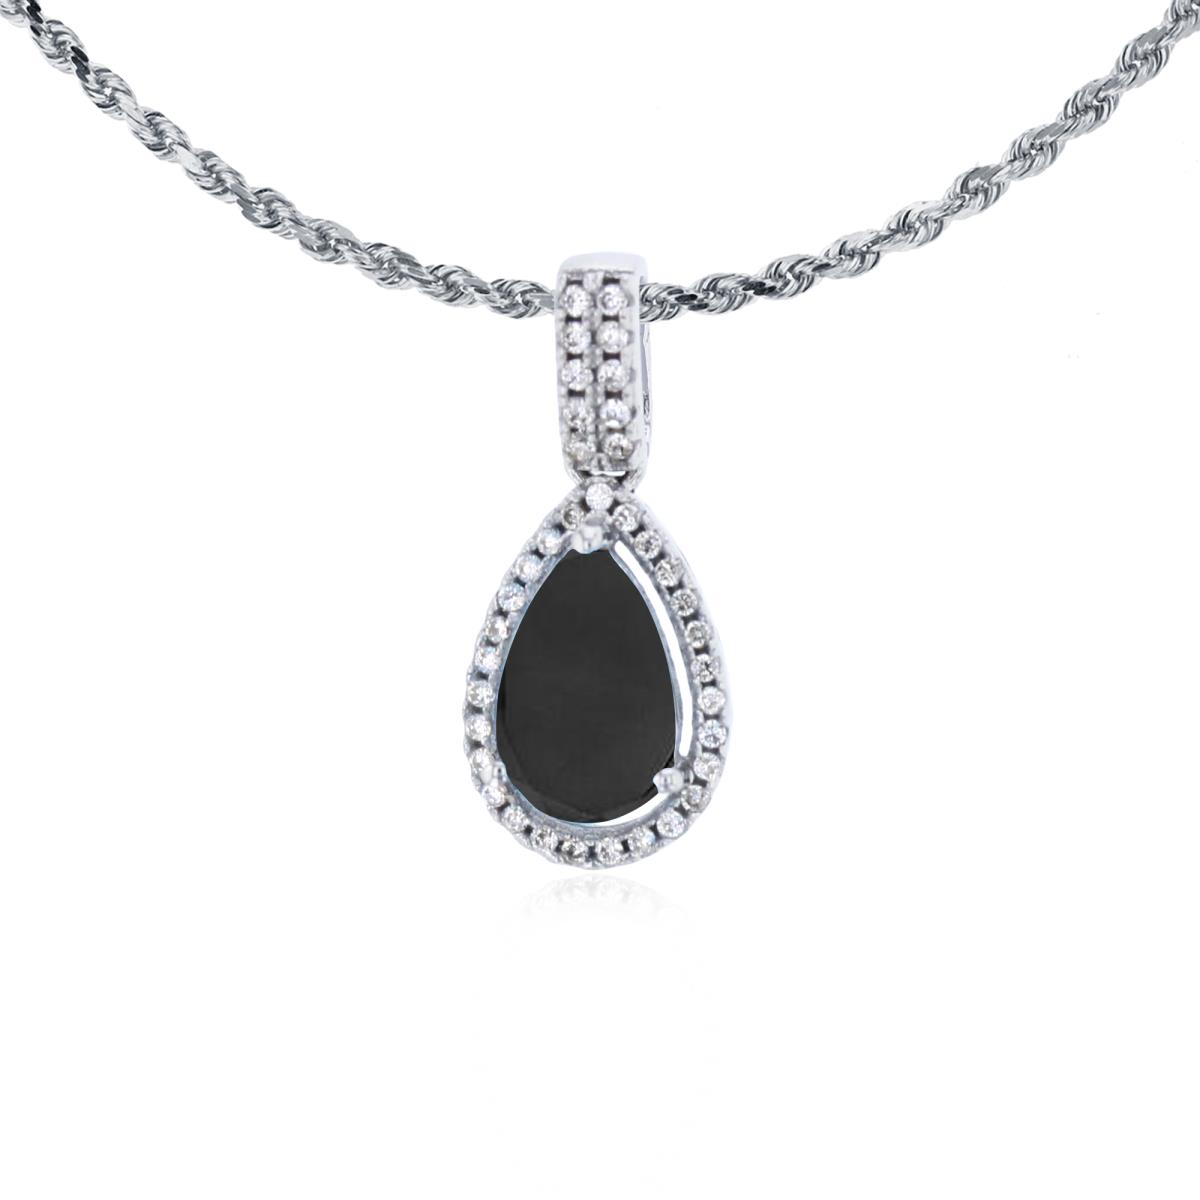 10K White Gold 8x5mm Pear Cut Onyx & 0.11 CTTW Diamond Halo 18" Rope Chain Necklace